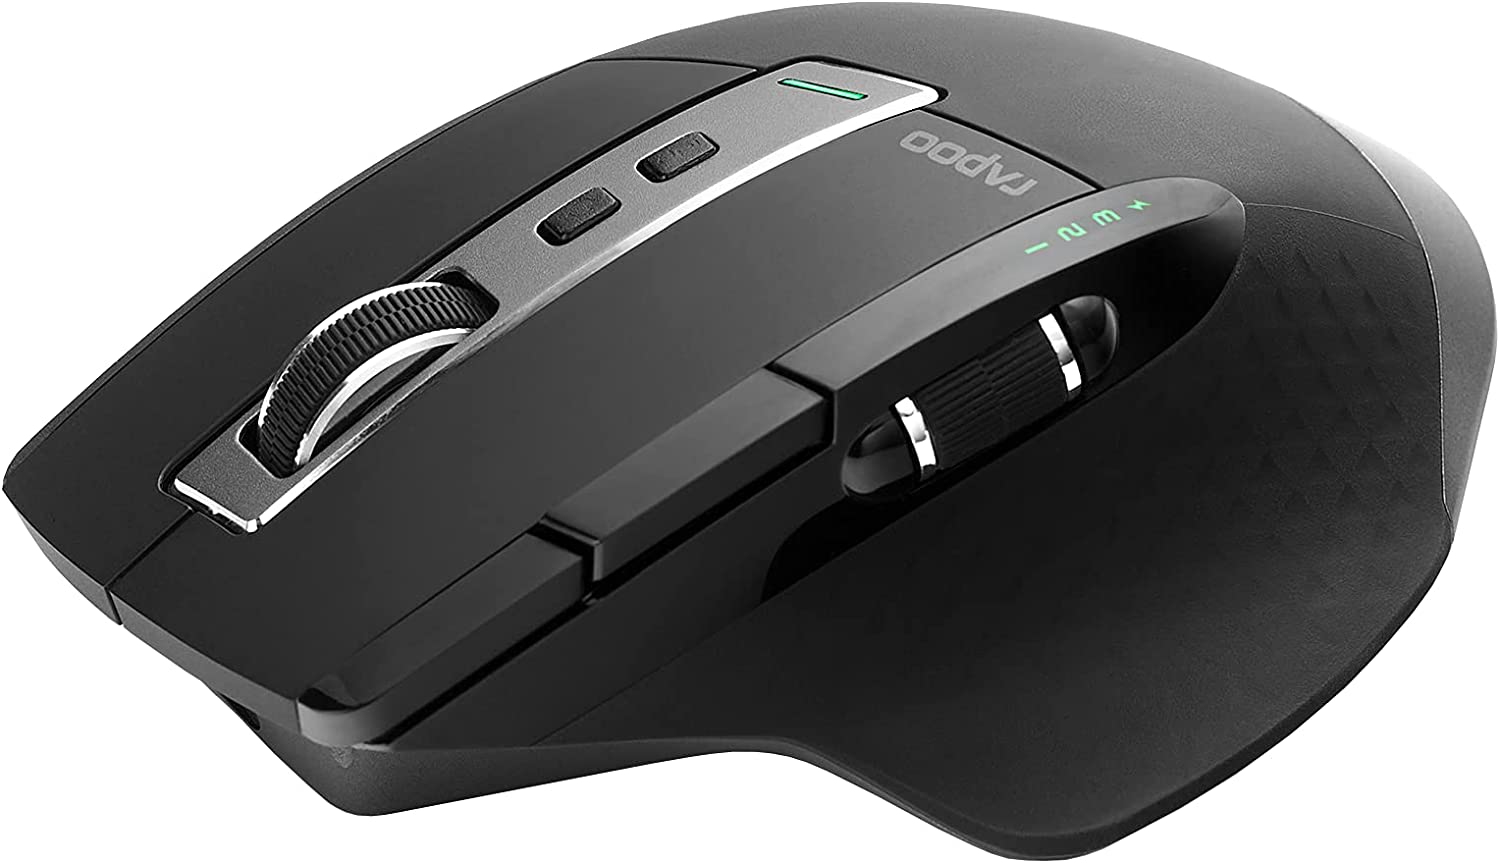 RAPOO Wireless Mouse, Multi-Device Bluetooth Mouse for Laptop, Cordless Mouse up to 3200 DPI, Rechargeable Ergonomic Mouse with Side Wheel, High Precision Laser Mouse for Computer MacBook Desktop